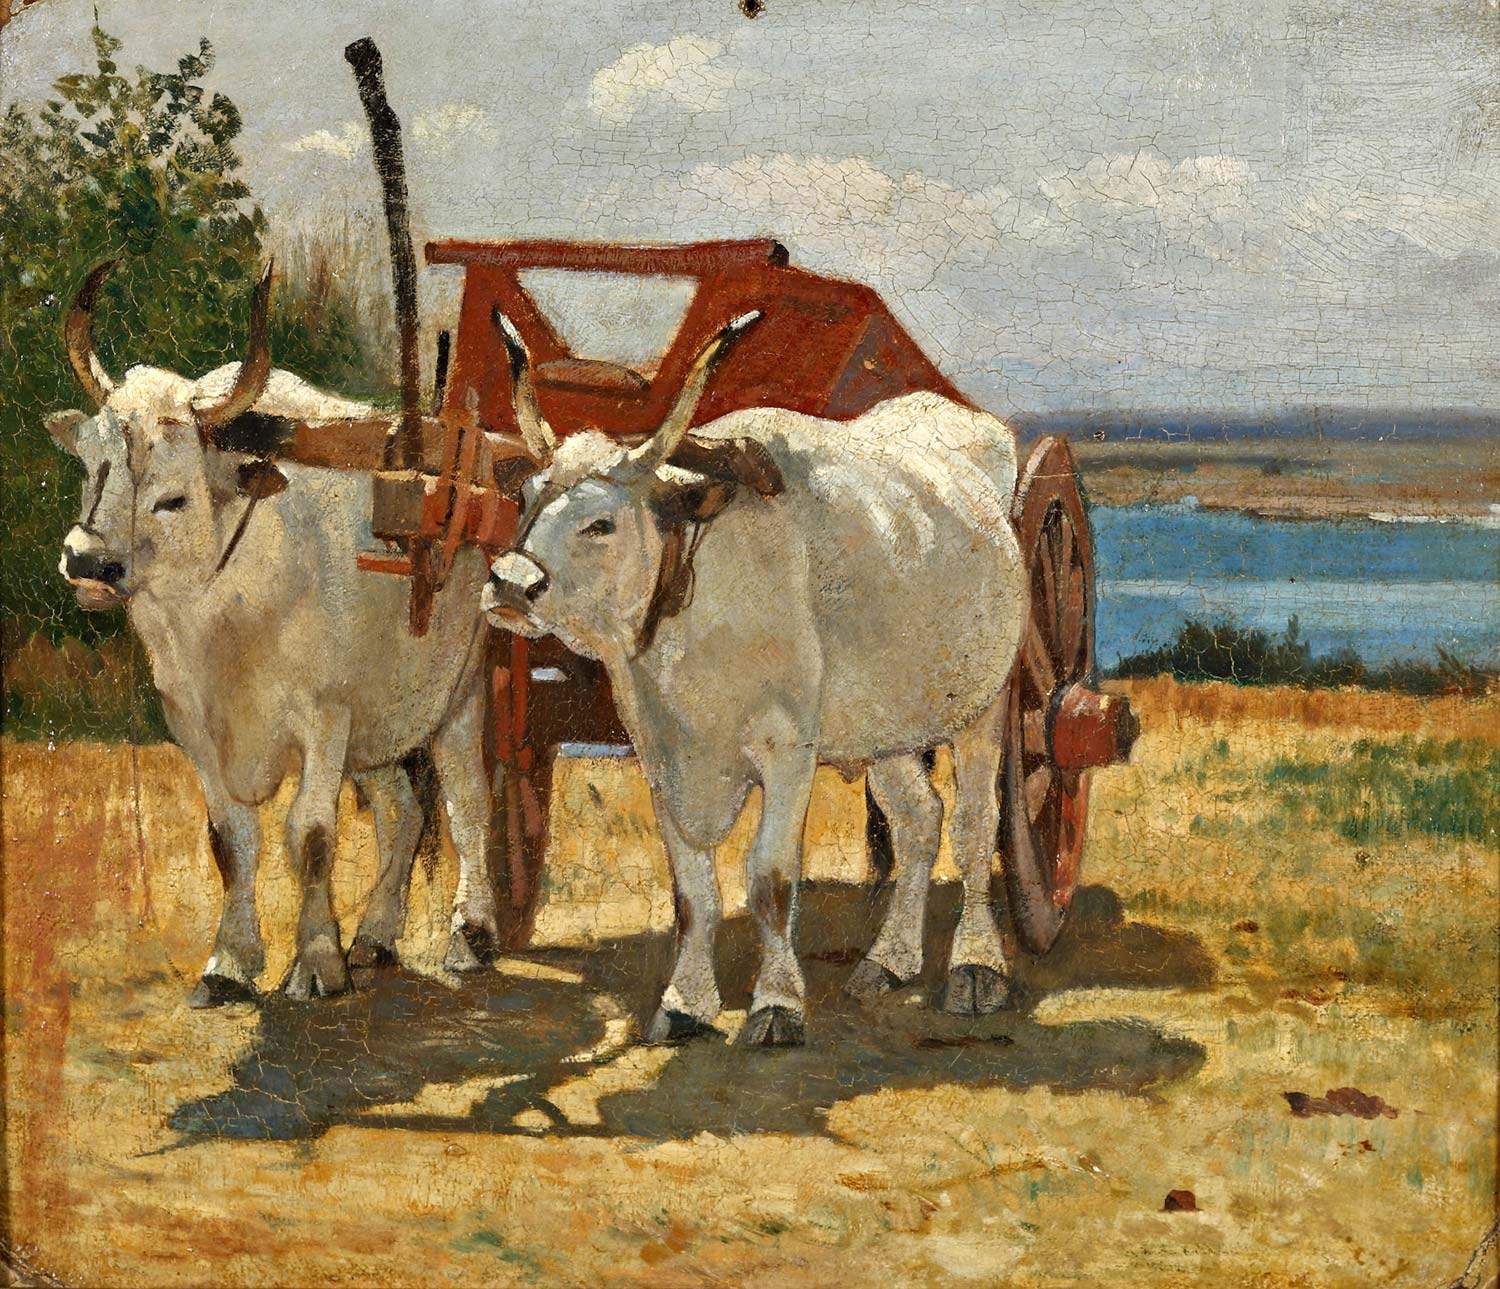 Macchiaioli protagonists of an exhibition in Turin